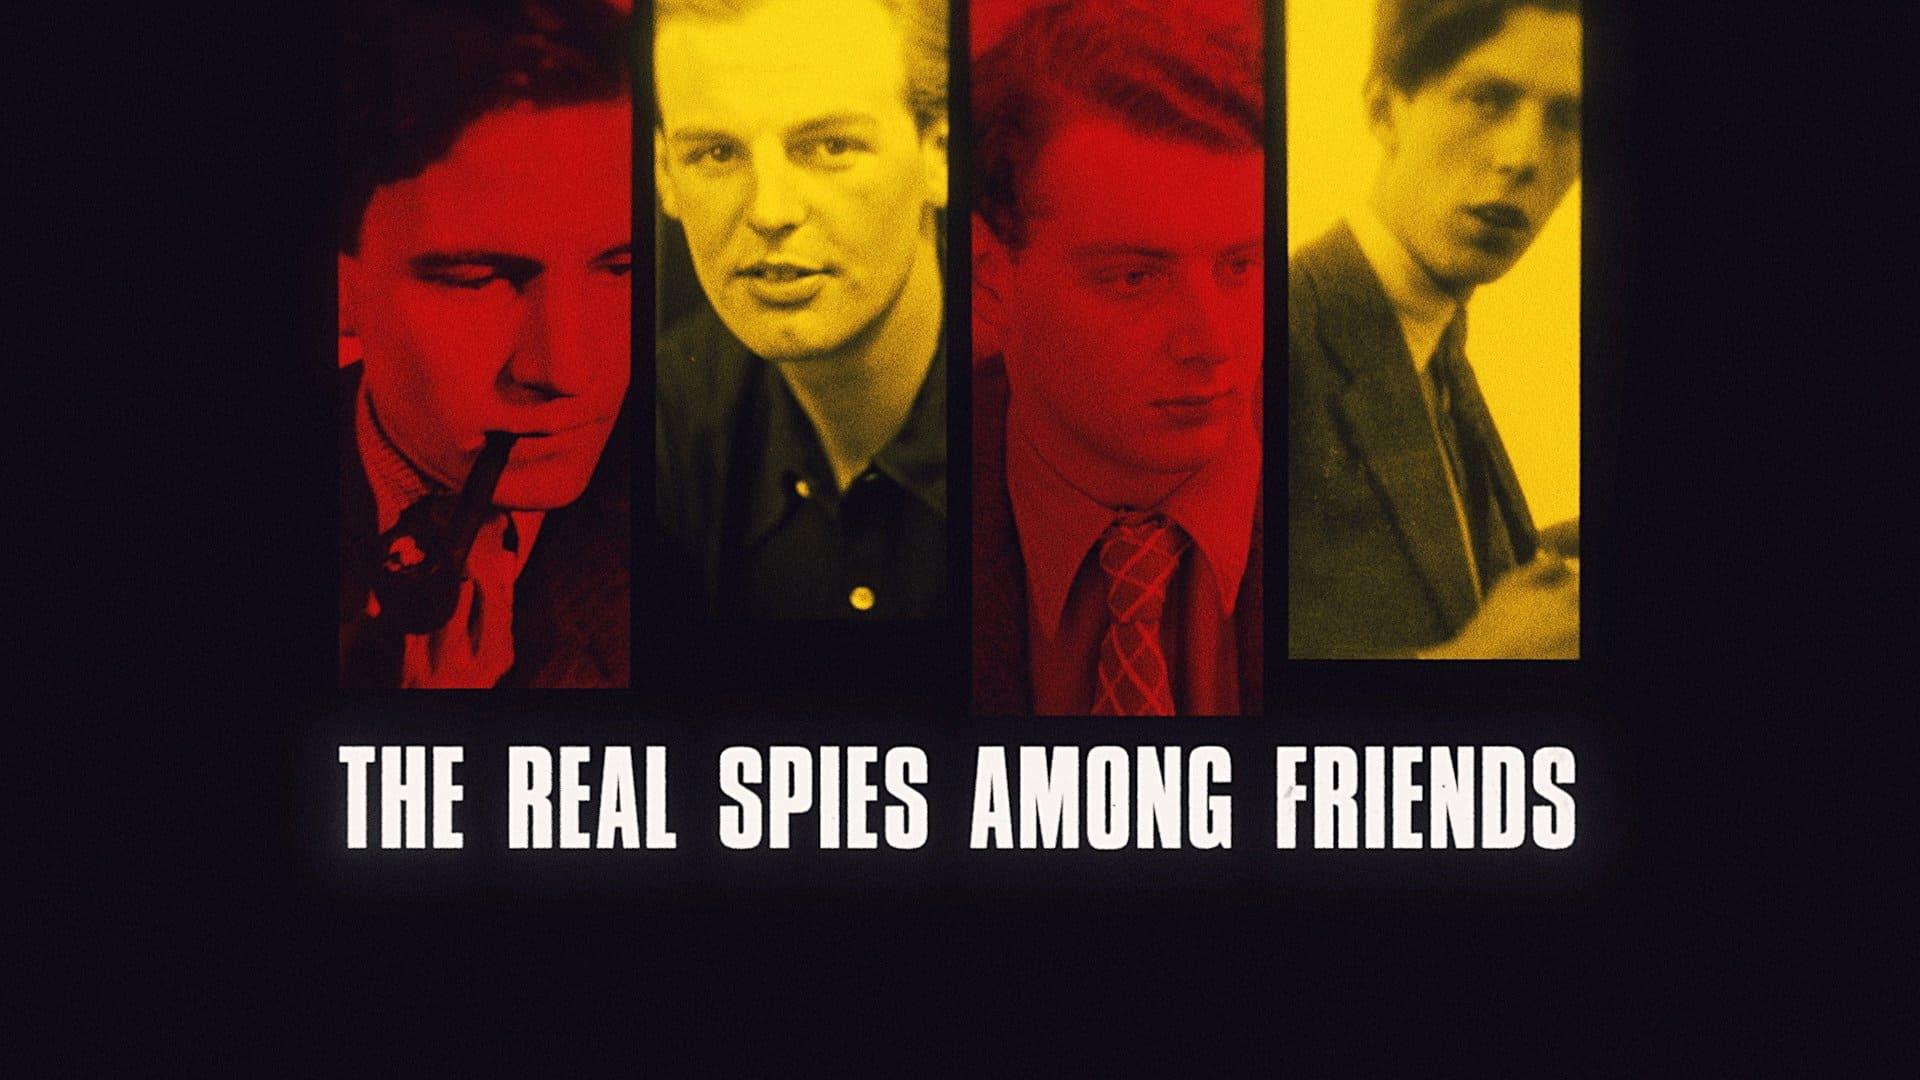 The Real Spies Among Friends backdrop